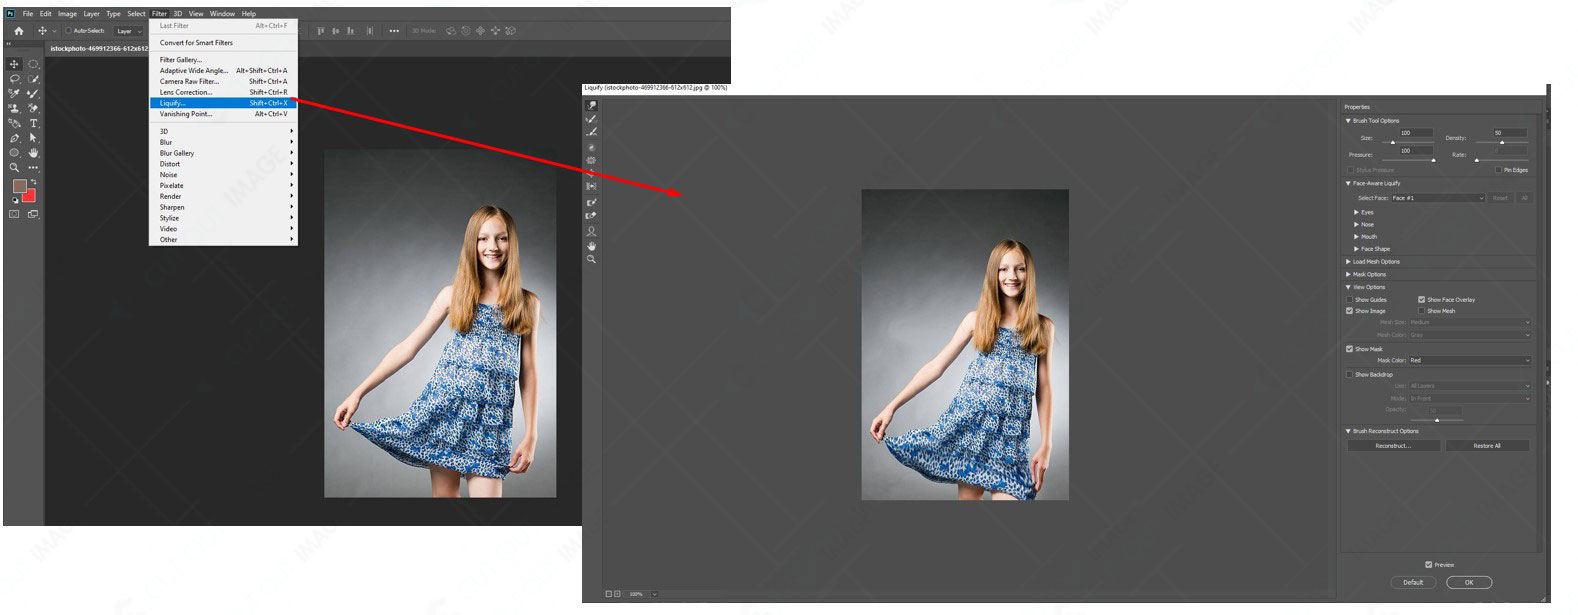 How To Wrap an Image in Photoshop [ Complete Solution ]